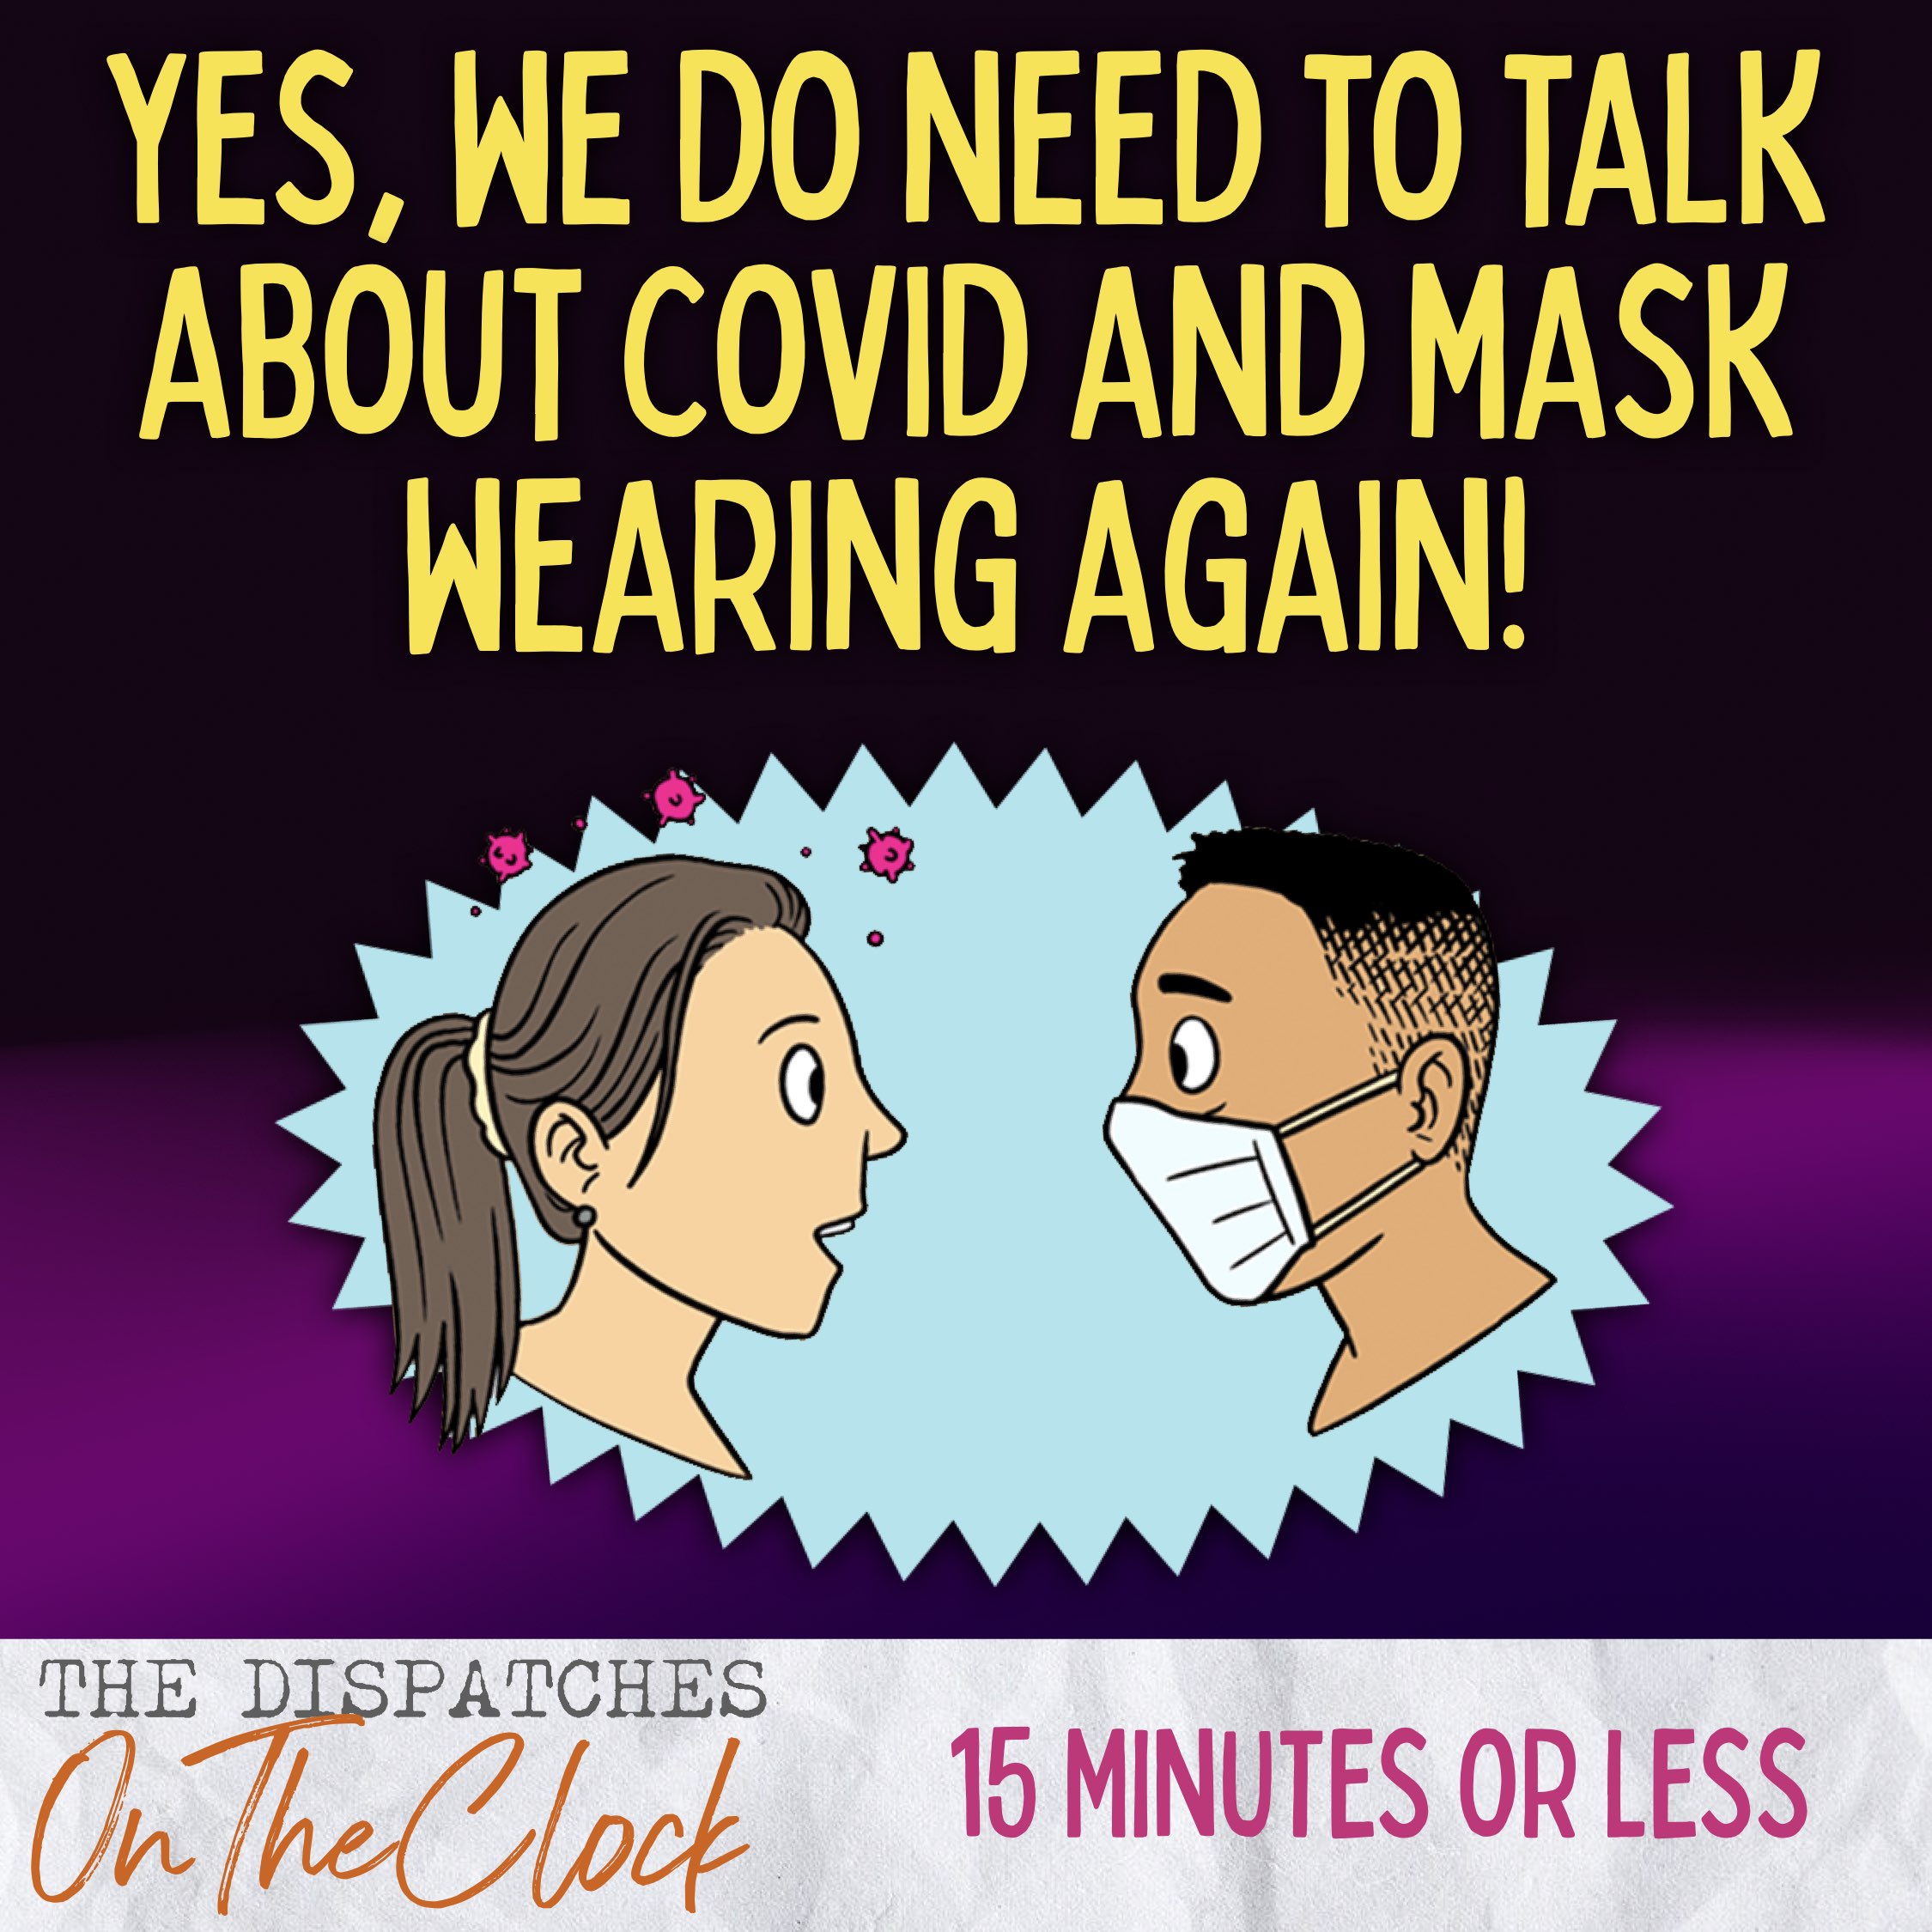 ON THE CLOCK | Yes, We Do Need to Talk About COVID and Mask Wearing Again